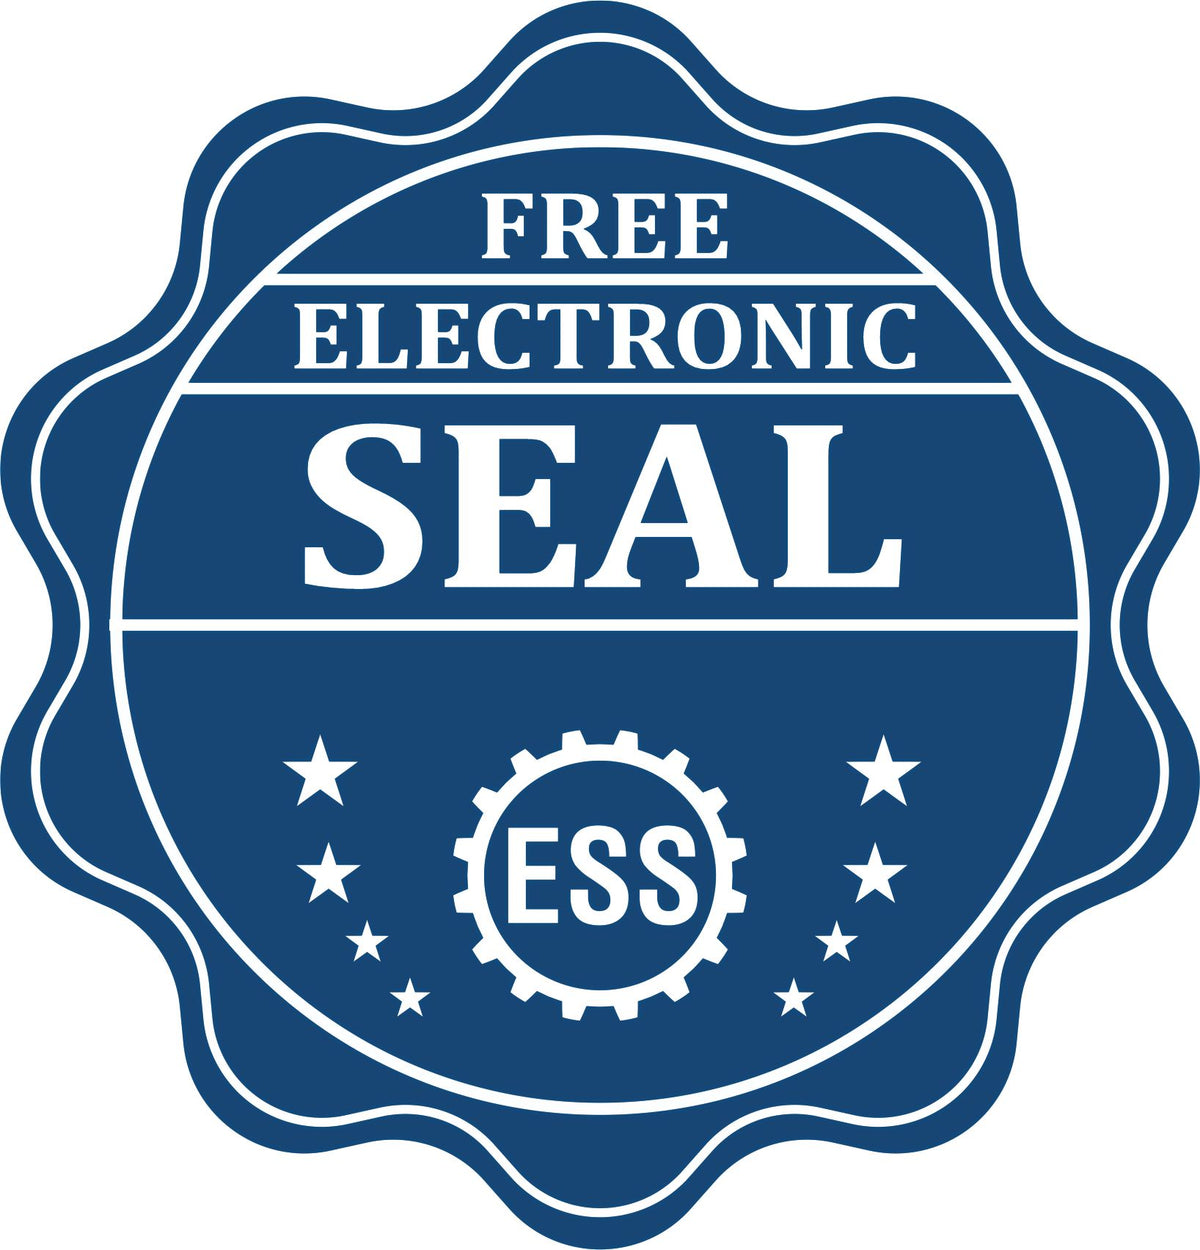 A badge showing a free electronic seal for the Hybrid Tennessee Land Surveyor Seal with stars and the ESS gear on the emblem.